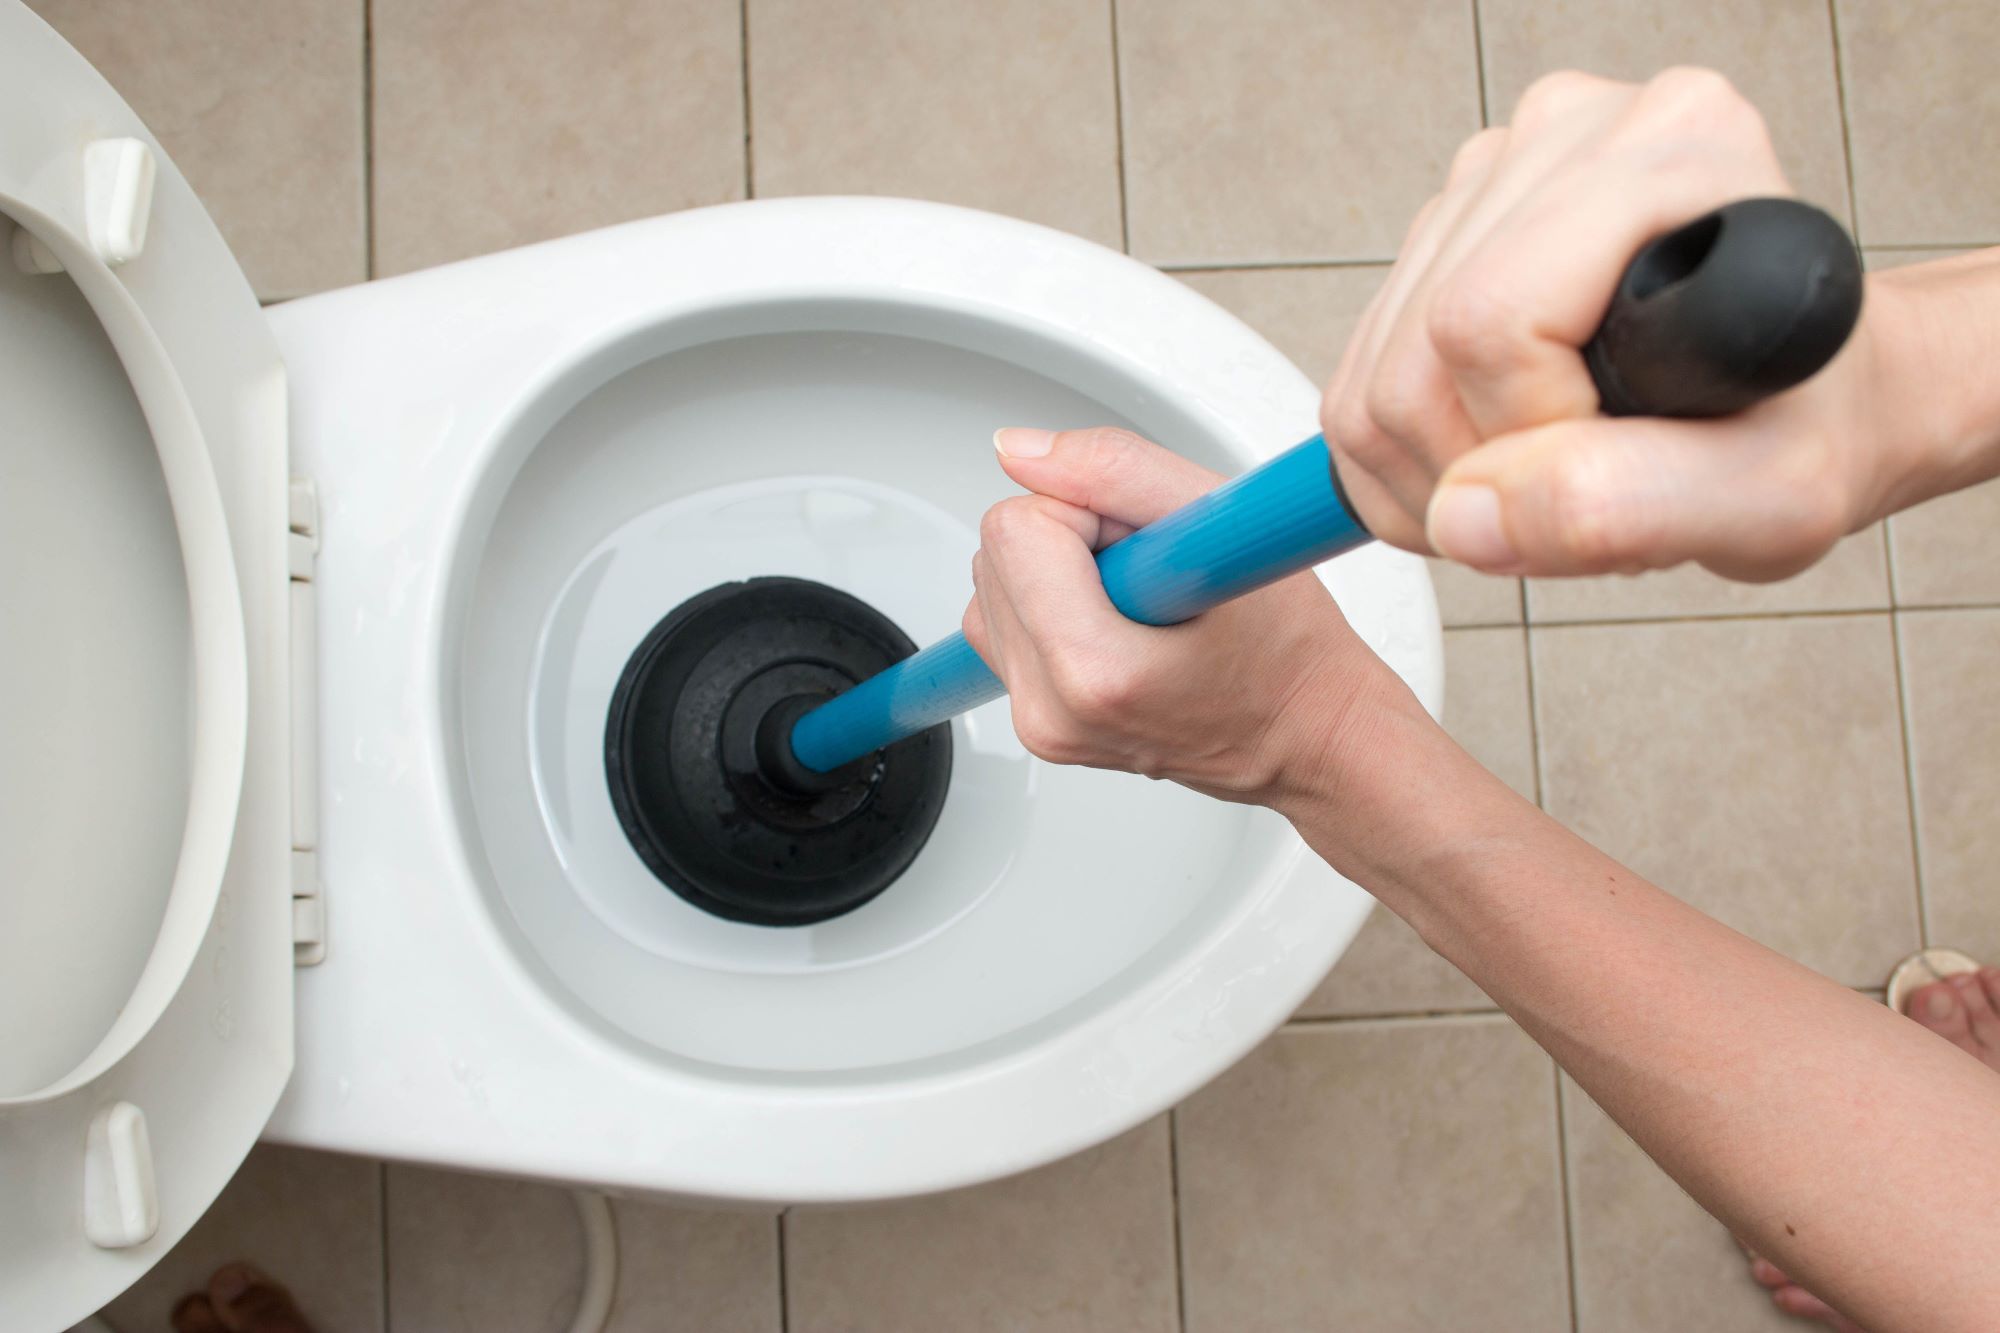 How To Clean Toilet Without A Brush